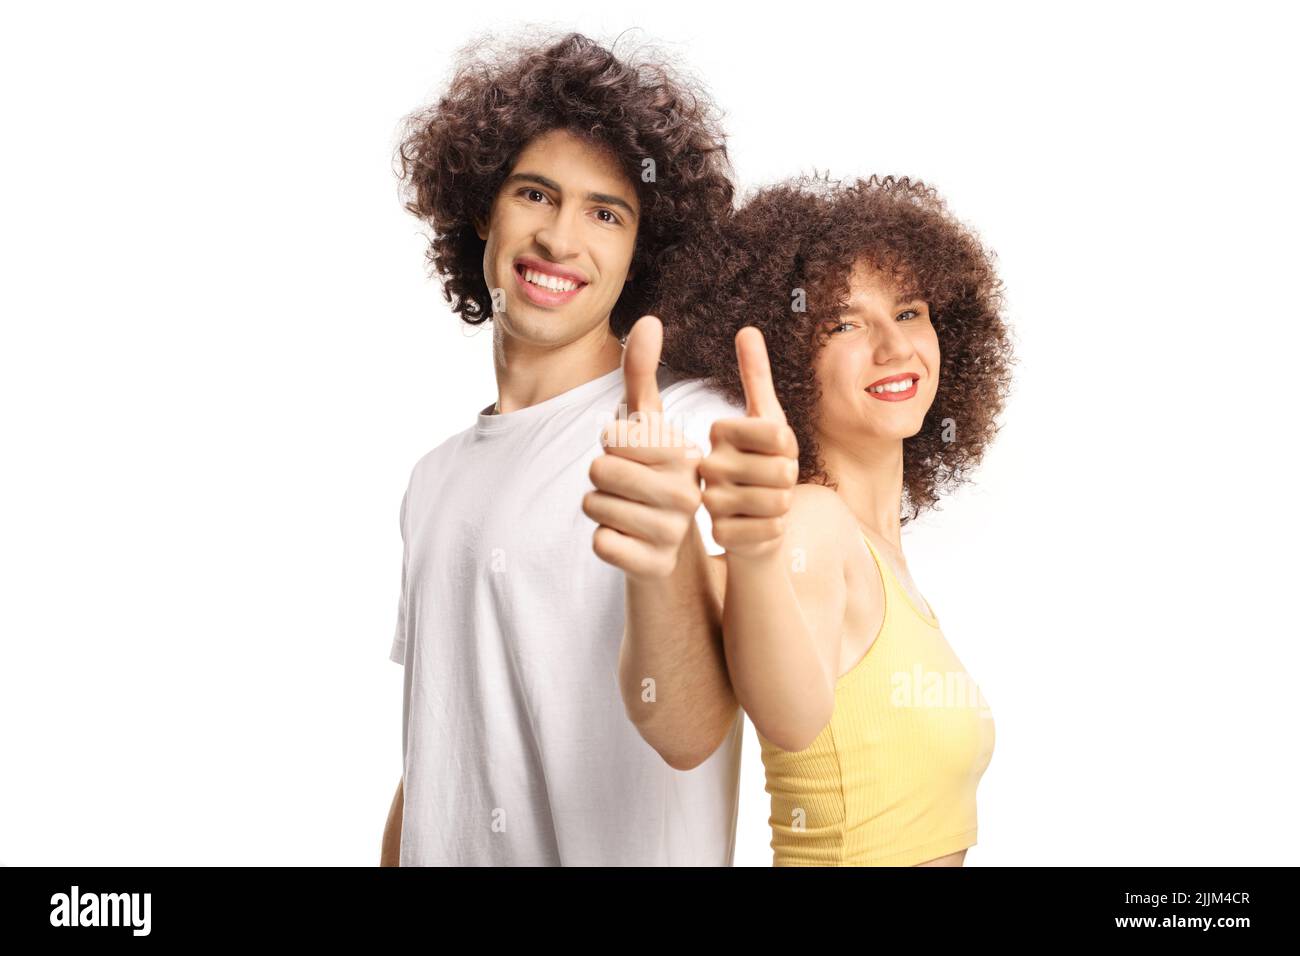 Couple with curly hair smiling and posing back to back with thumbs up isolated on white background Stock Photo